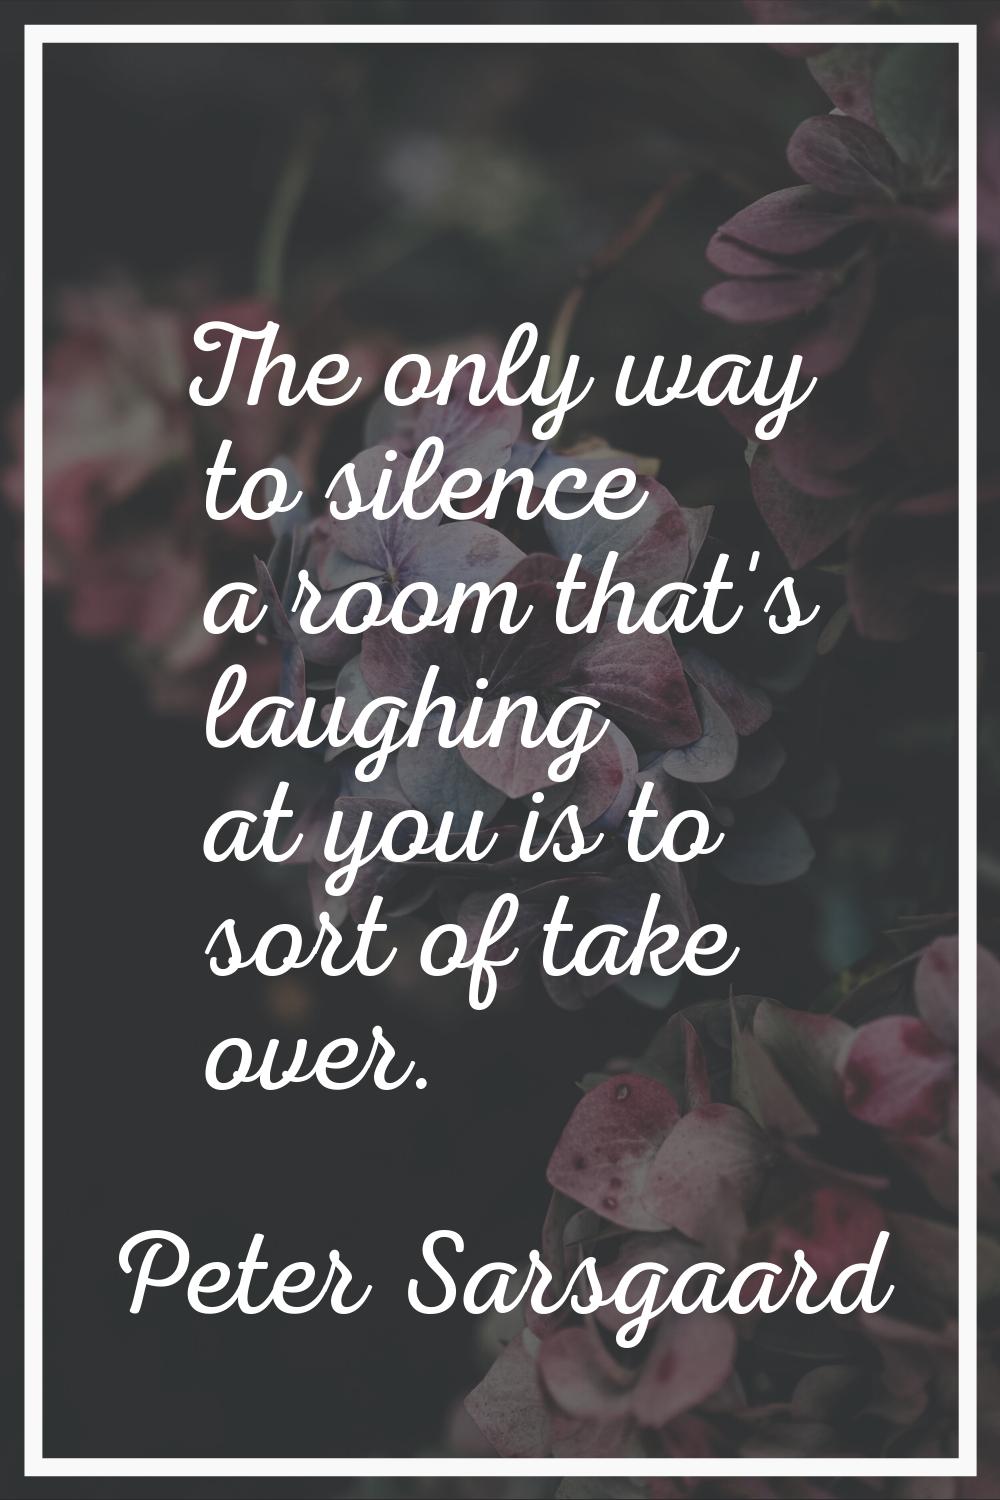 The only way to silence a room that's laughing at you is to sort of take over.